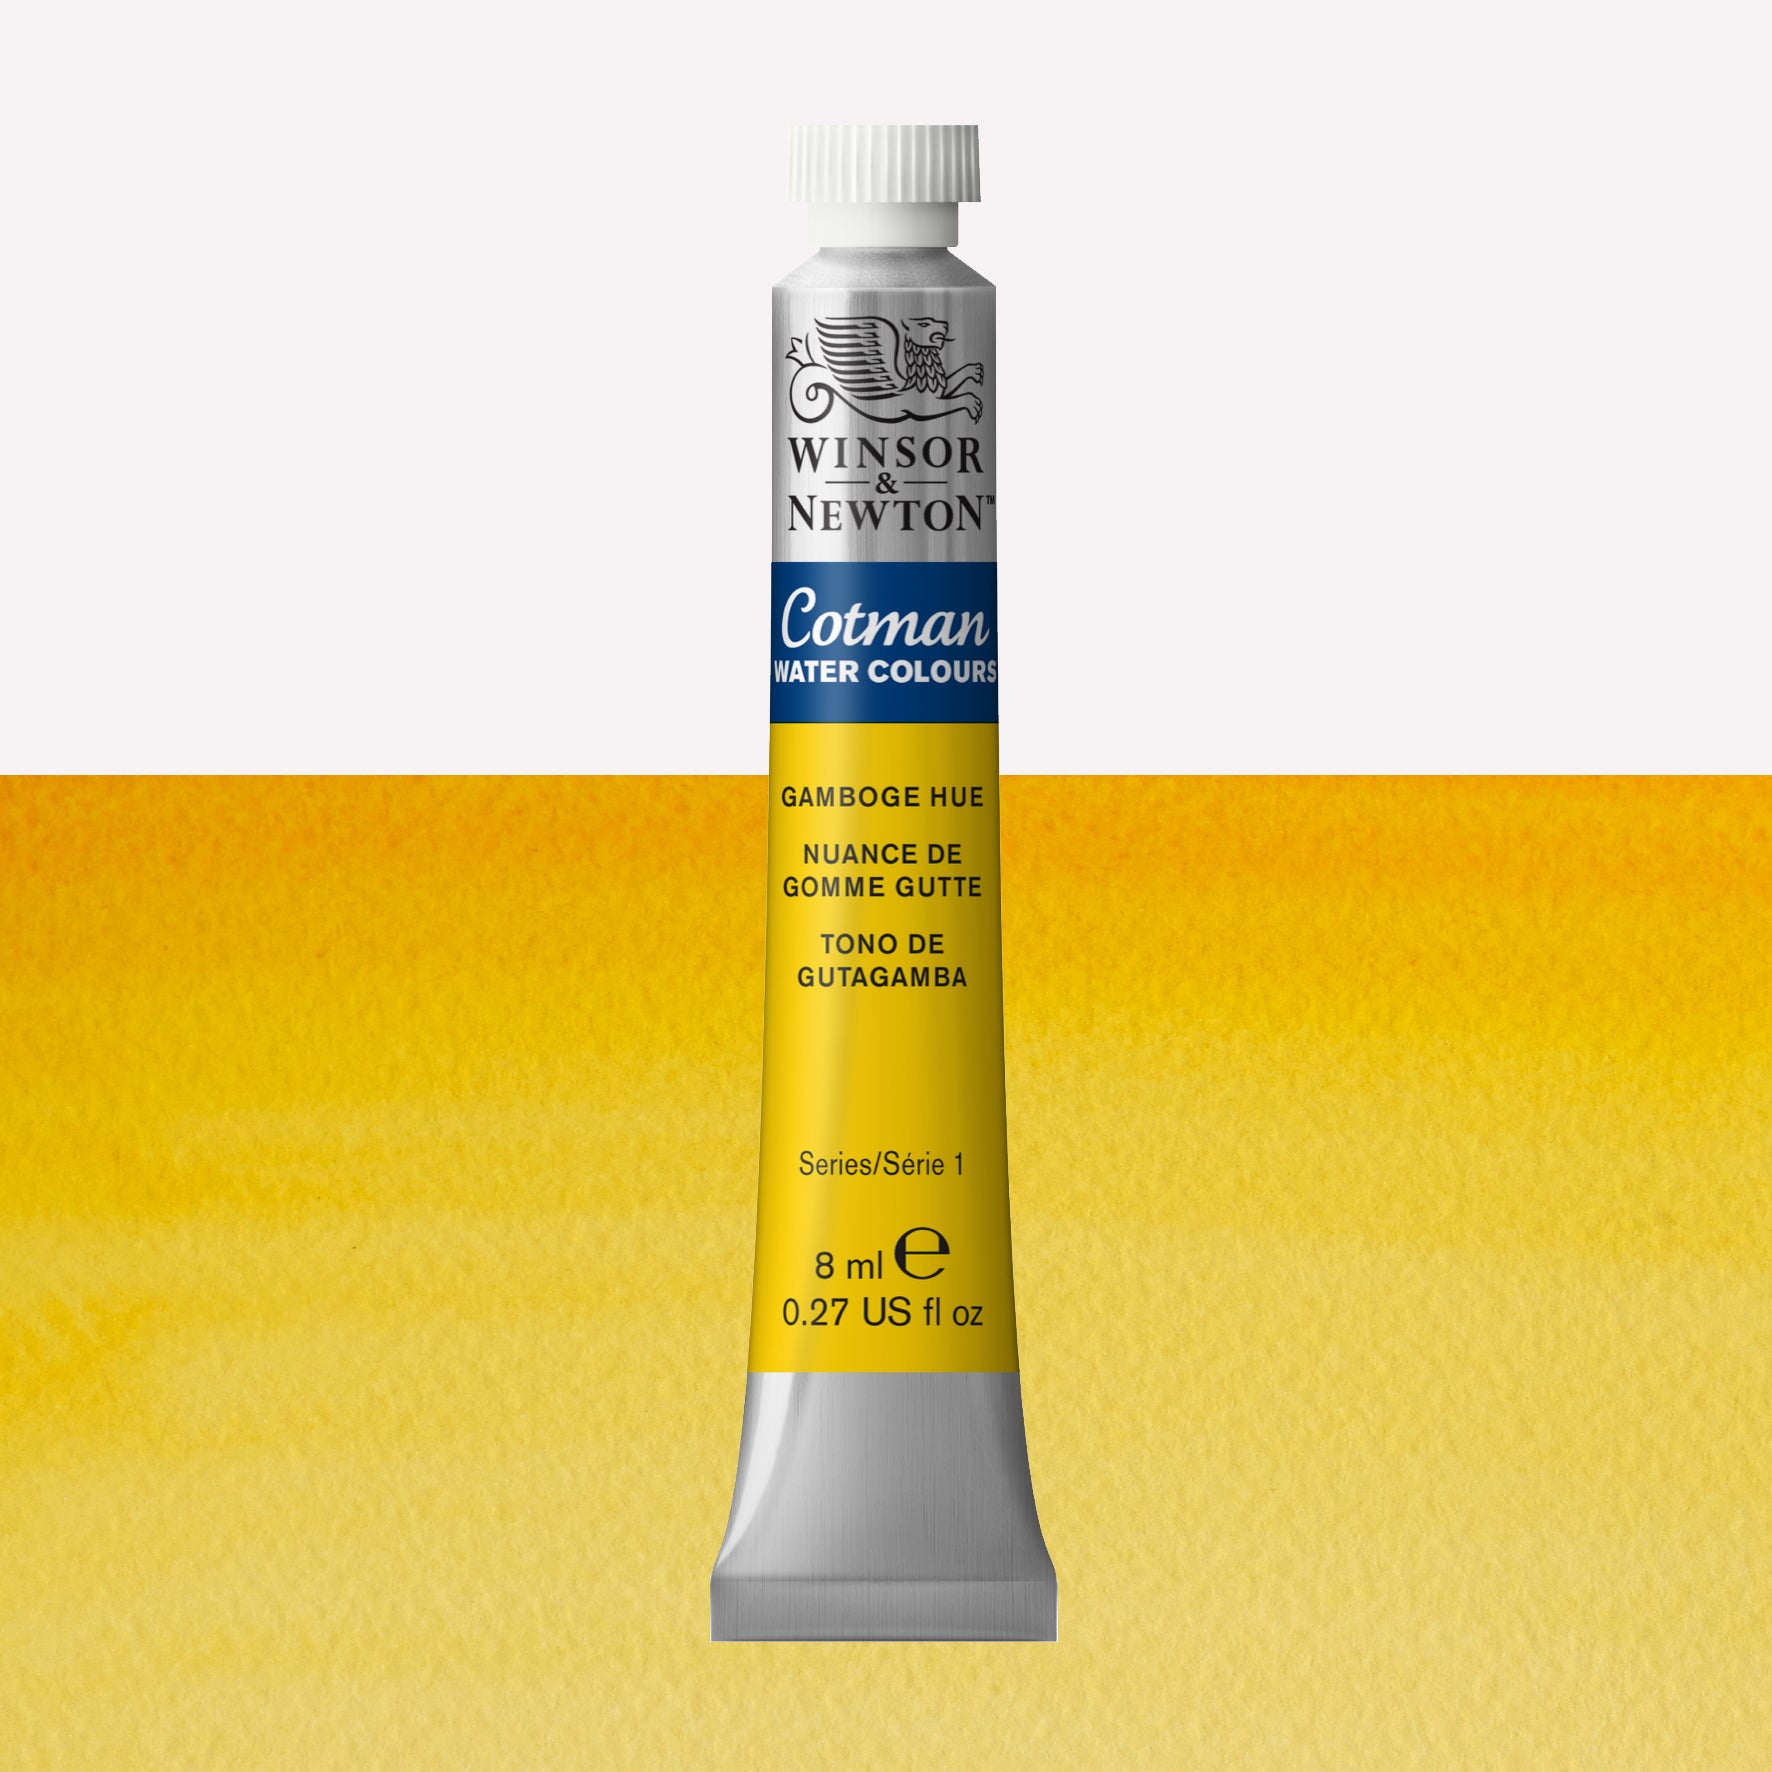 Winsor & Newton Cotman watercolour paint packaged in 8ml silver tubes with a white lid in the shade Gamboge Hue, over a warm yellow colour swatch.